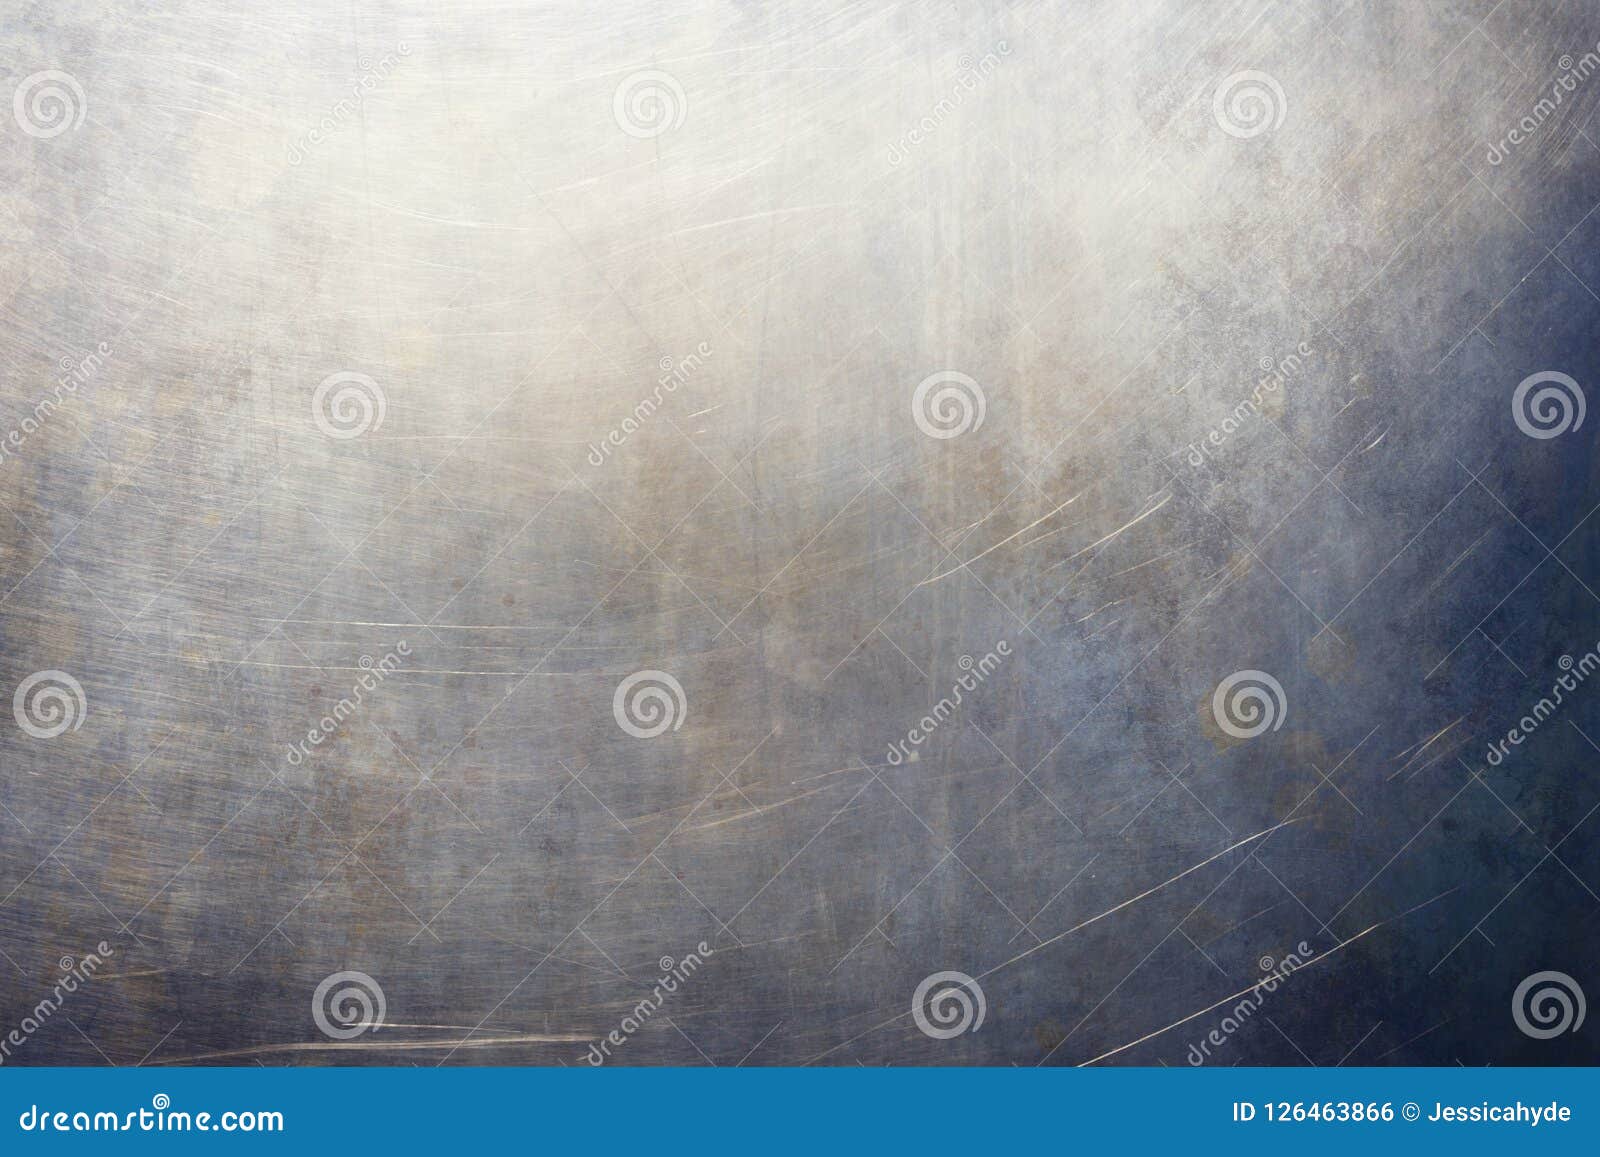 abstract blue metalic wall texture or background